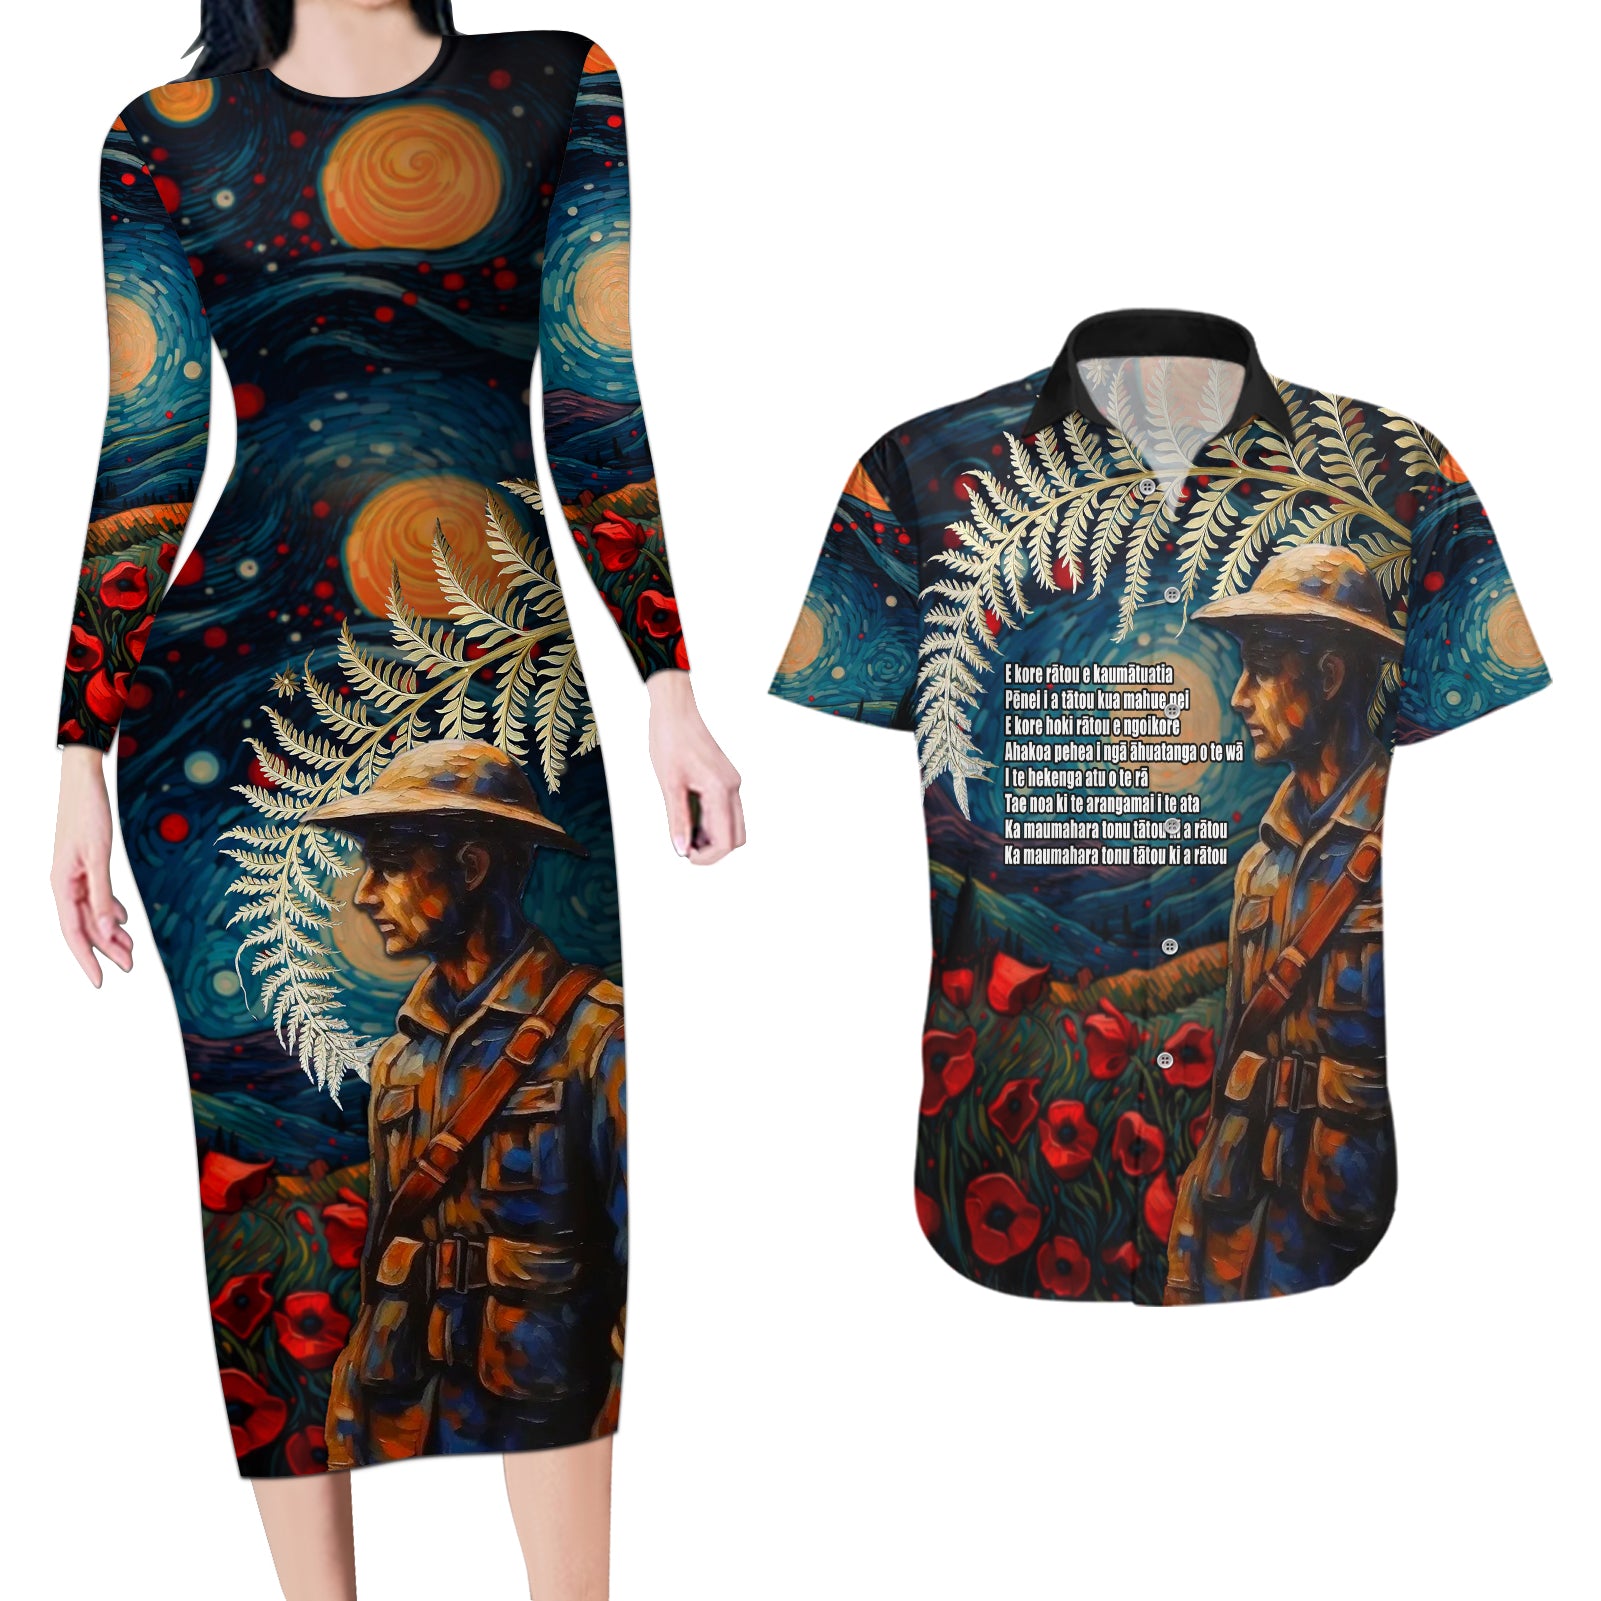 New Zealand Soldier ANZAC Day Couples Matching Long Sleeve Bodycon Dress and Hawaiian Shirt Silver Fern Starry Night Style LT03 Blue - Polynesian Pride